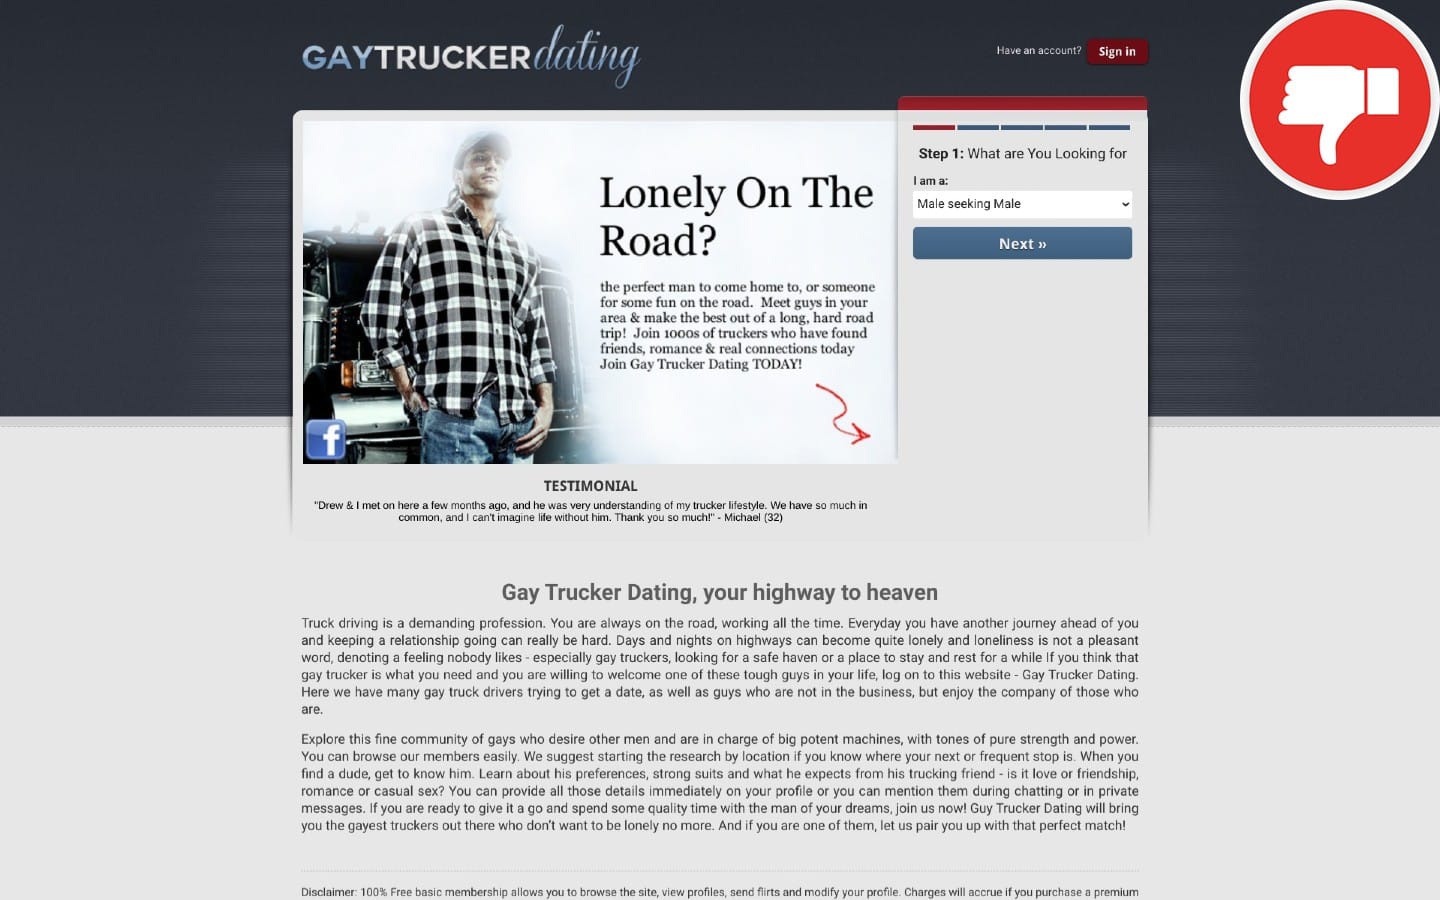 Review Gaytruckerdating.com scam